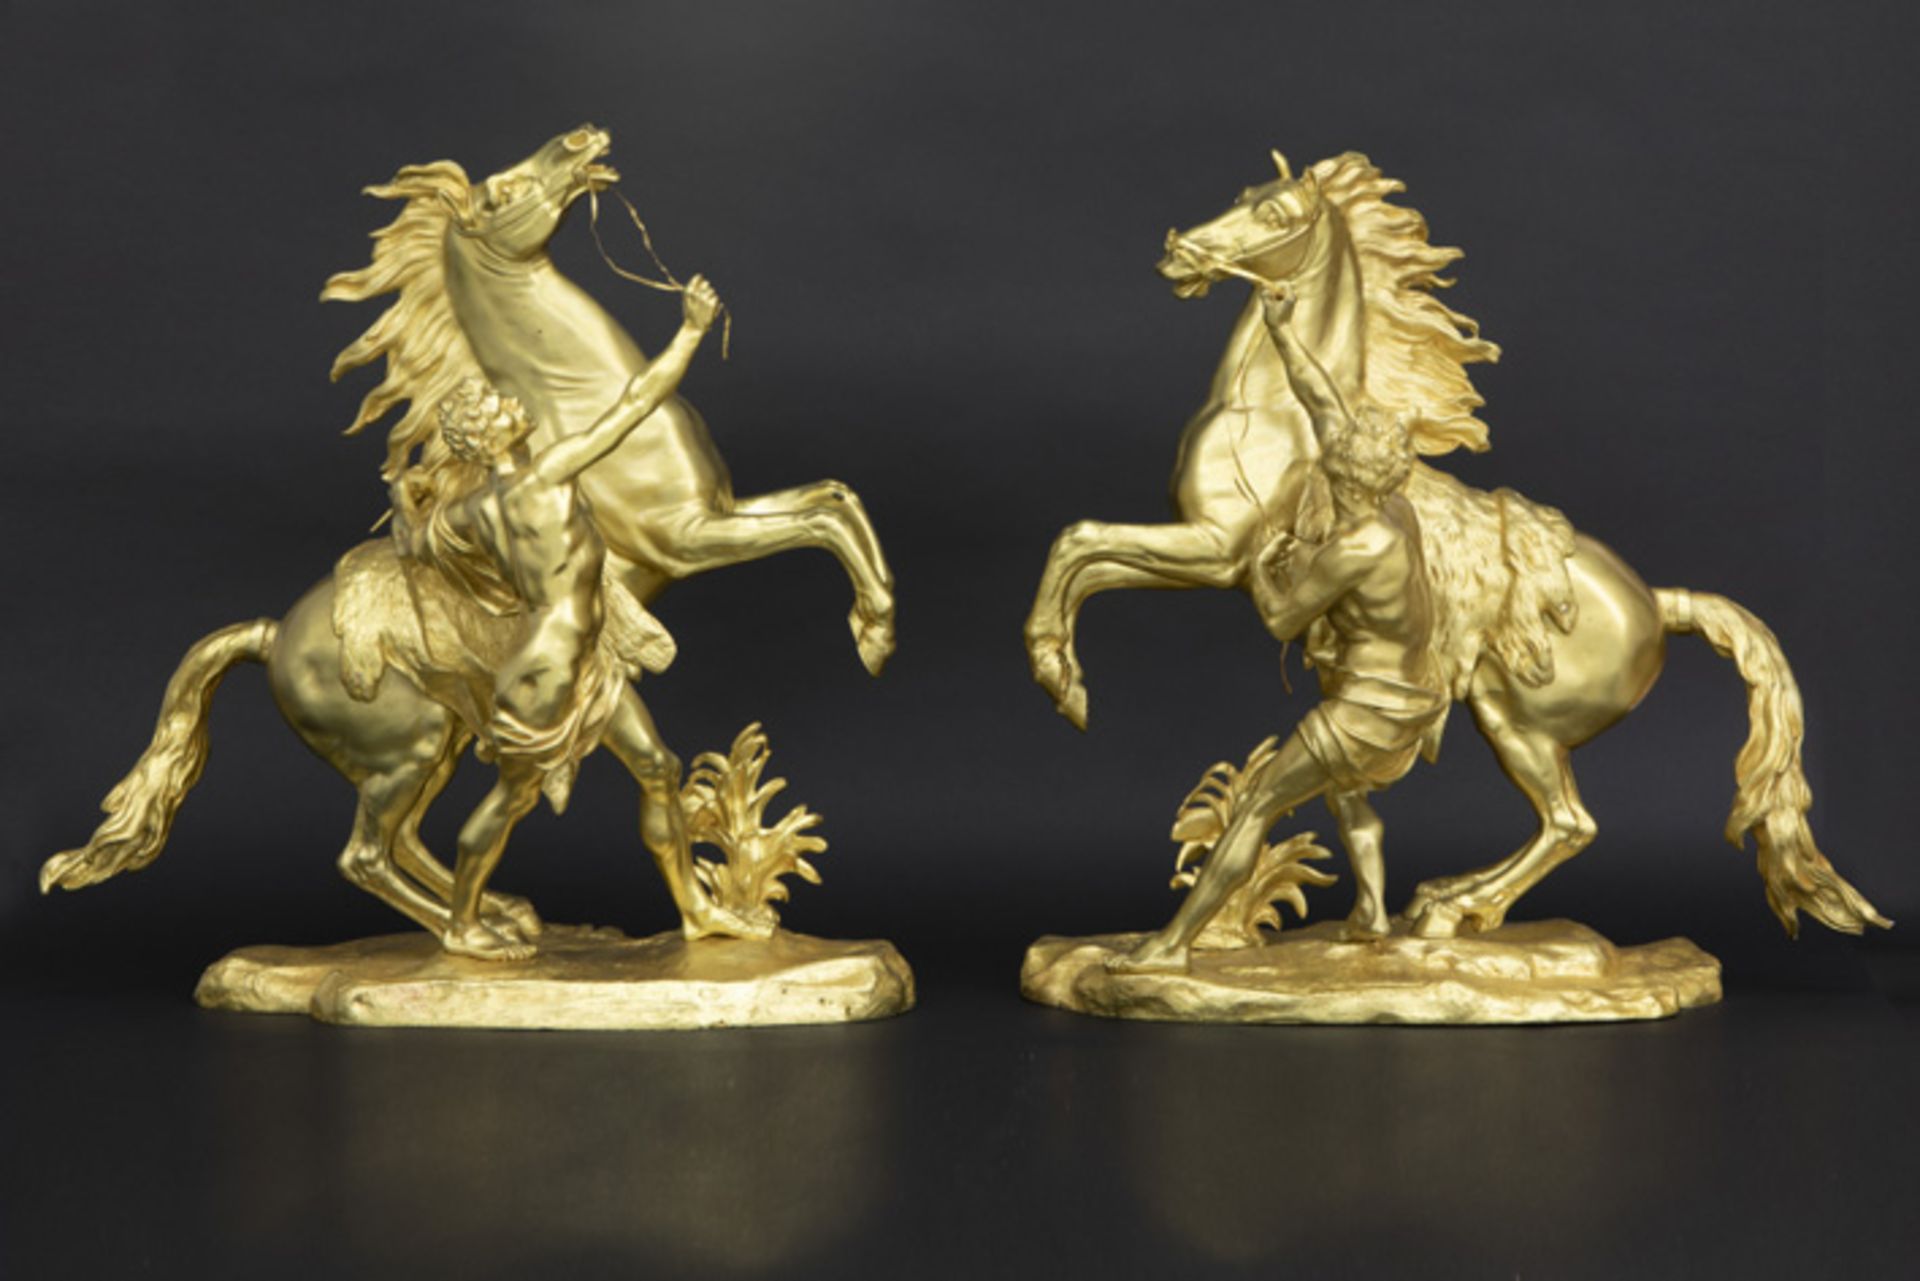 pair of antique "Marly Horses" sculptures in gilded bronze || COUSTOU GUILLAUME I (1677 - 1746) paar